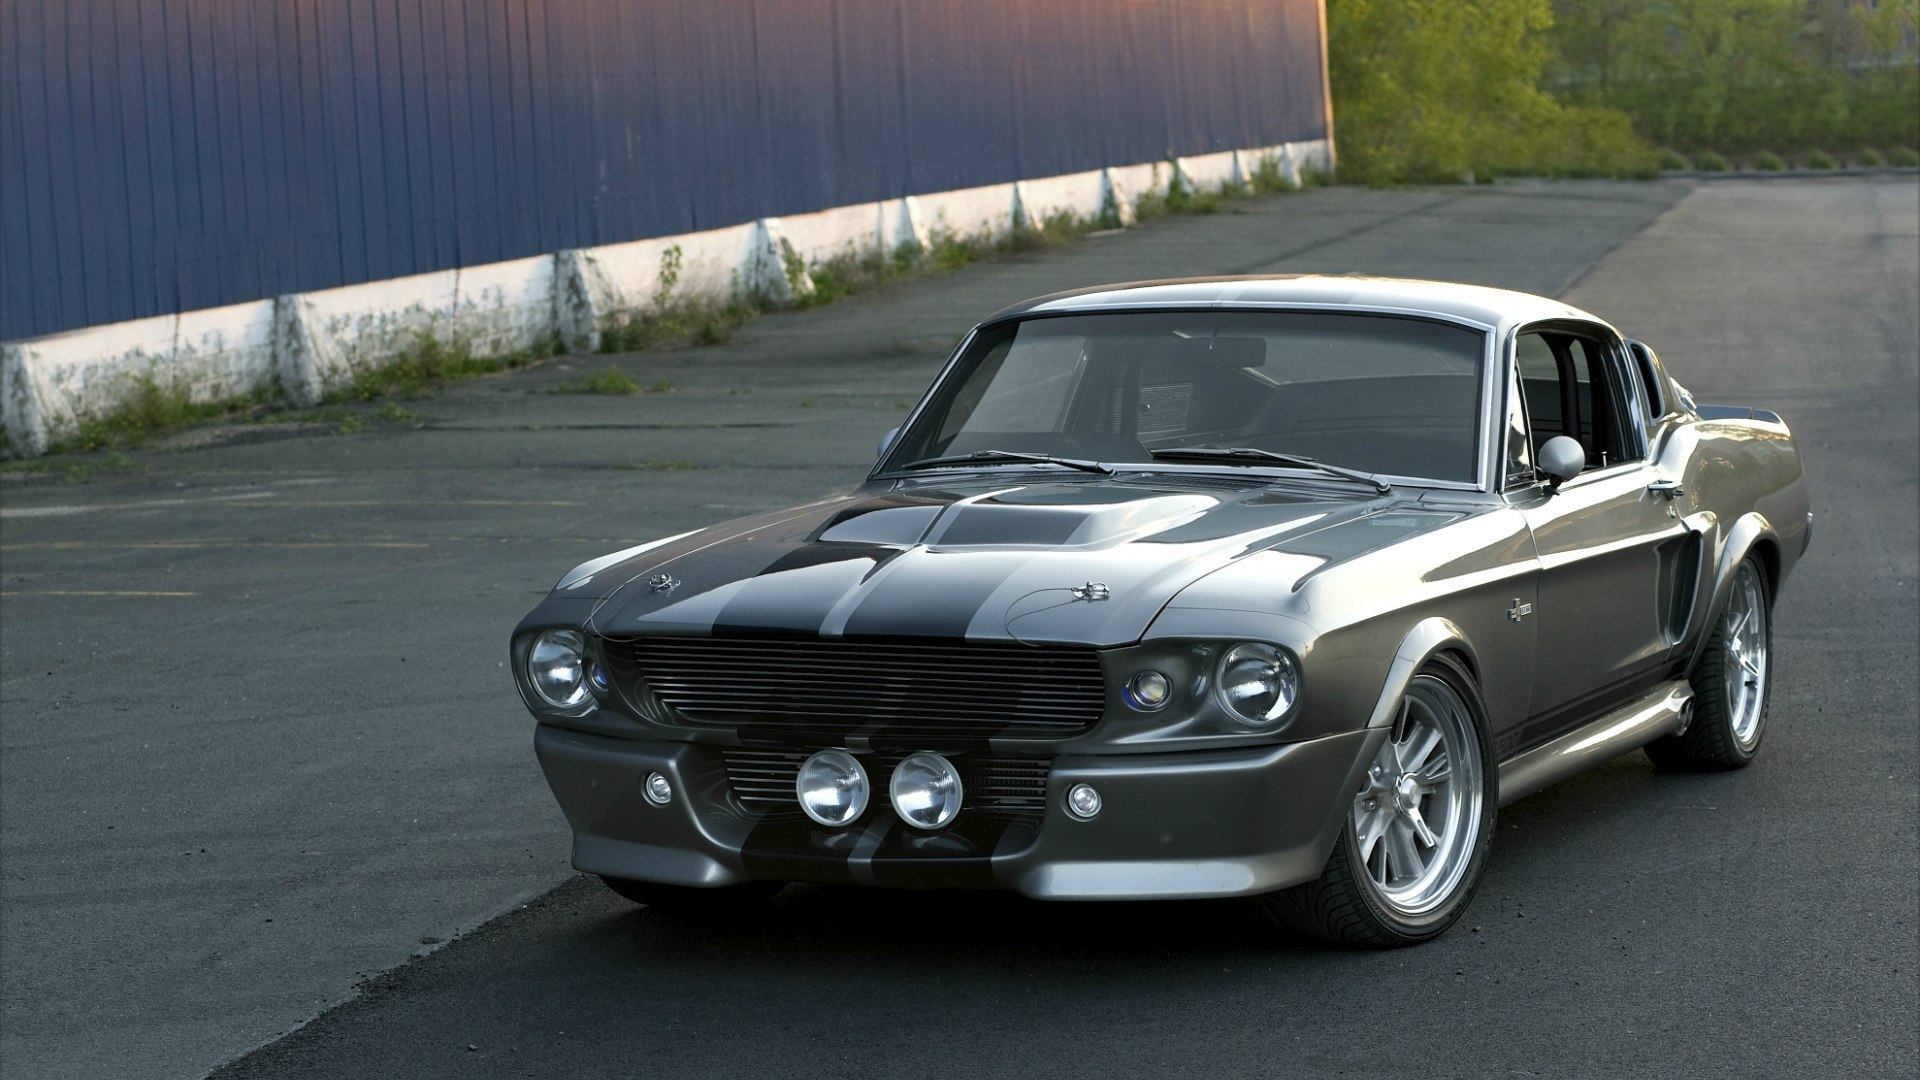 Ford Mustang Shelby 1967 Eleanor